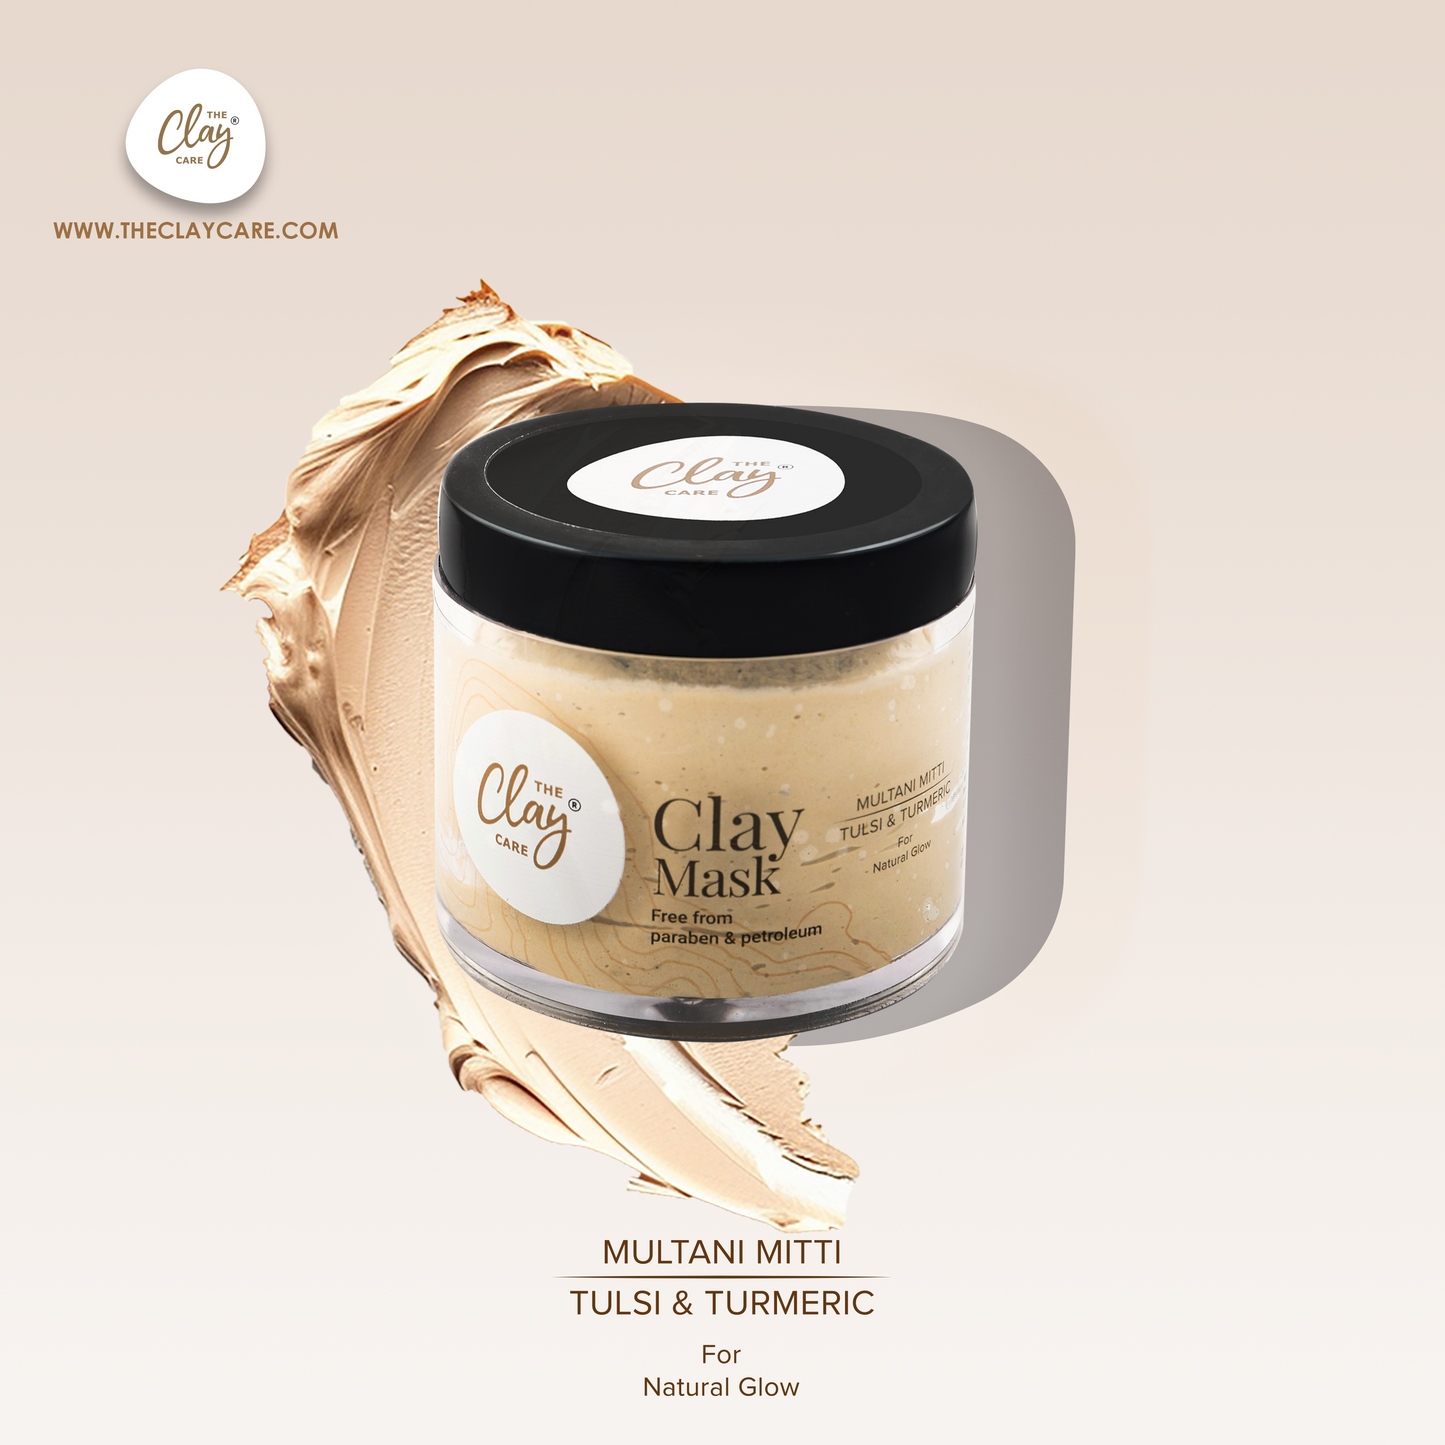 Clay Care Multani Mitti Face Pack Mask for Glowing Skin, Tan Removal & Sun Damage Protection with Turmeric & Tulsi- Paraben and Petroleum Free